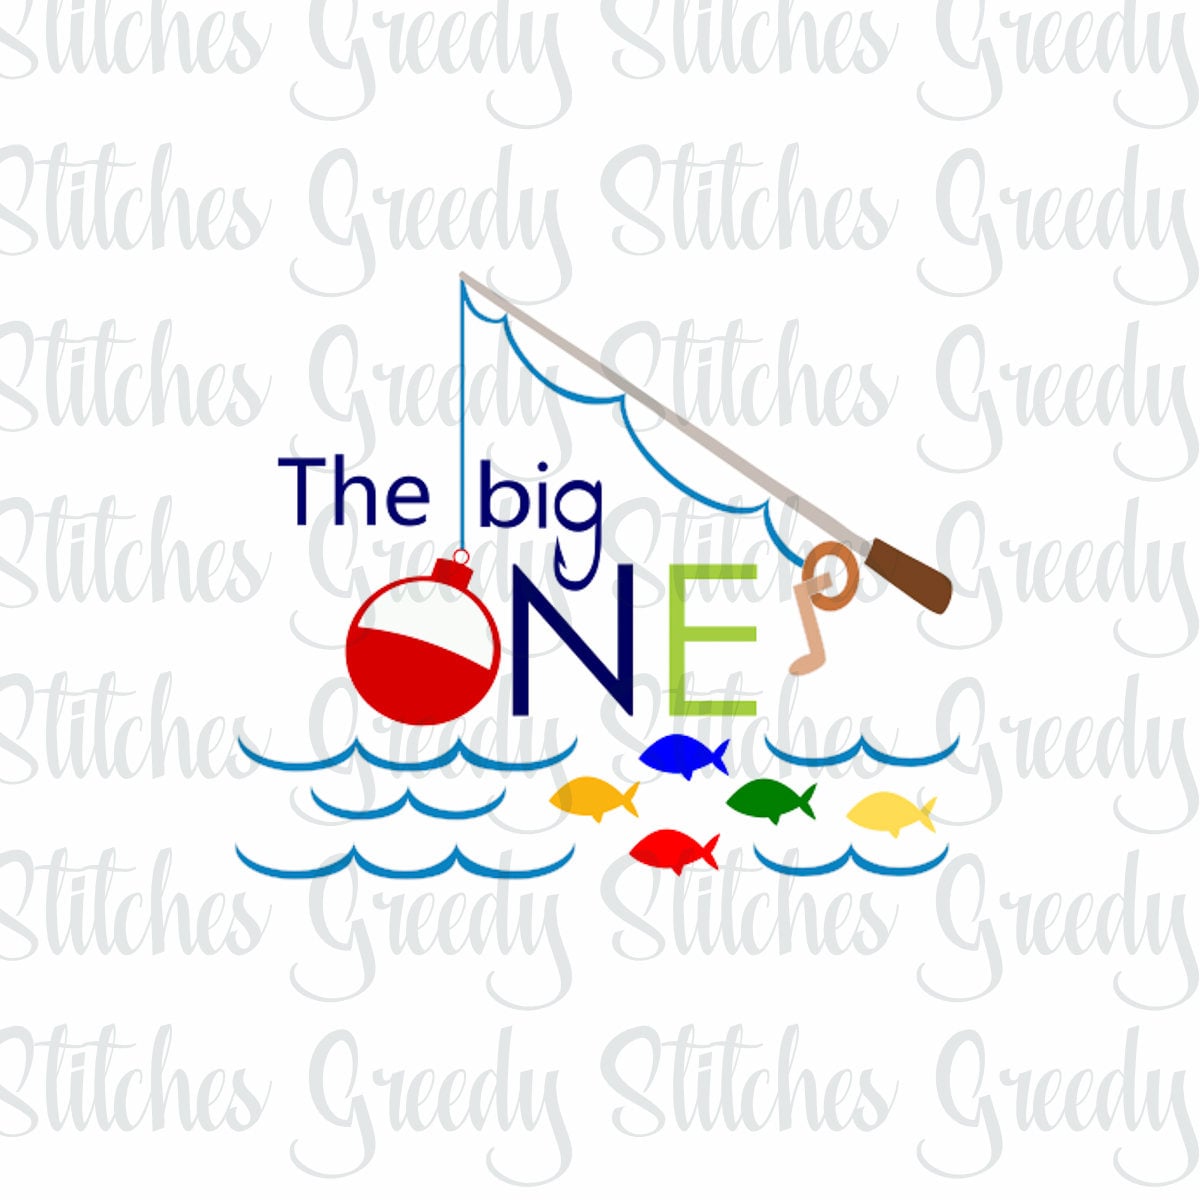 Download The Big One & O'fish'ally The Big One svg dxf fcm